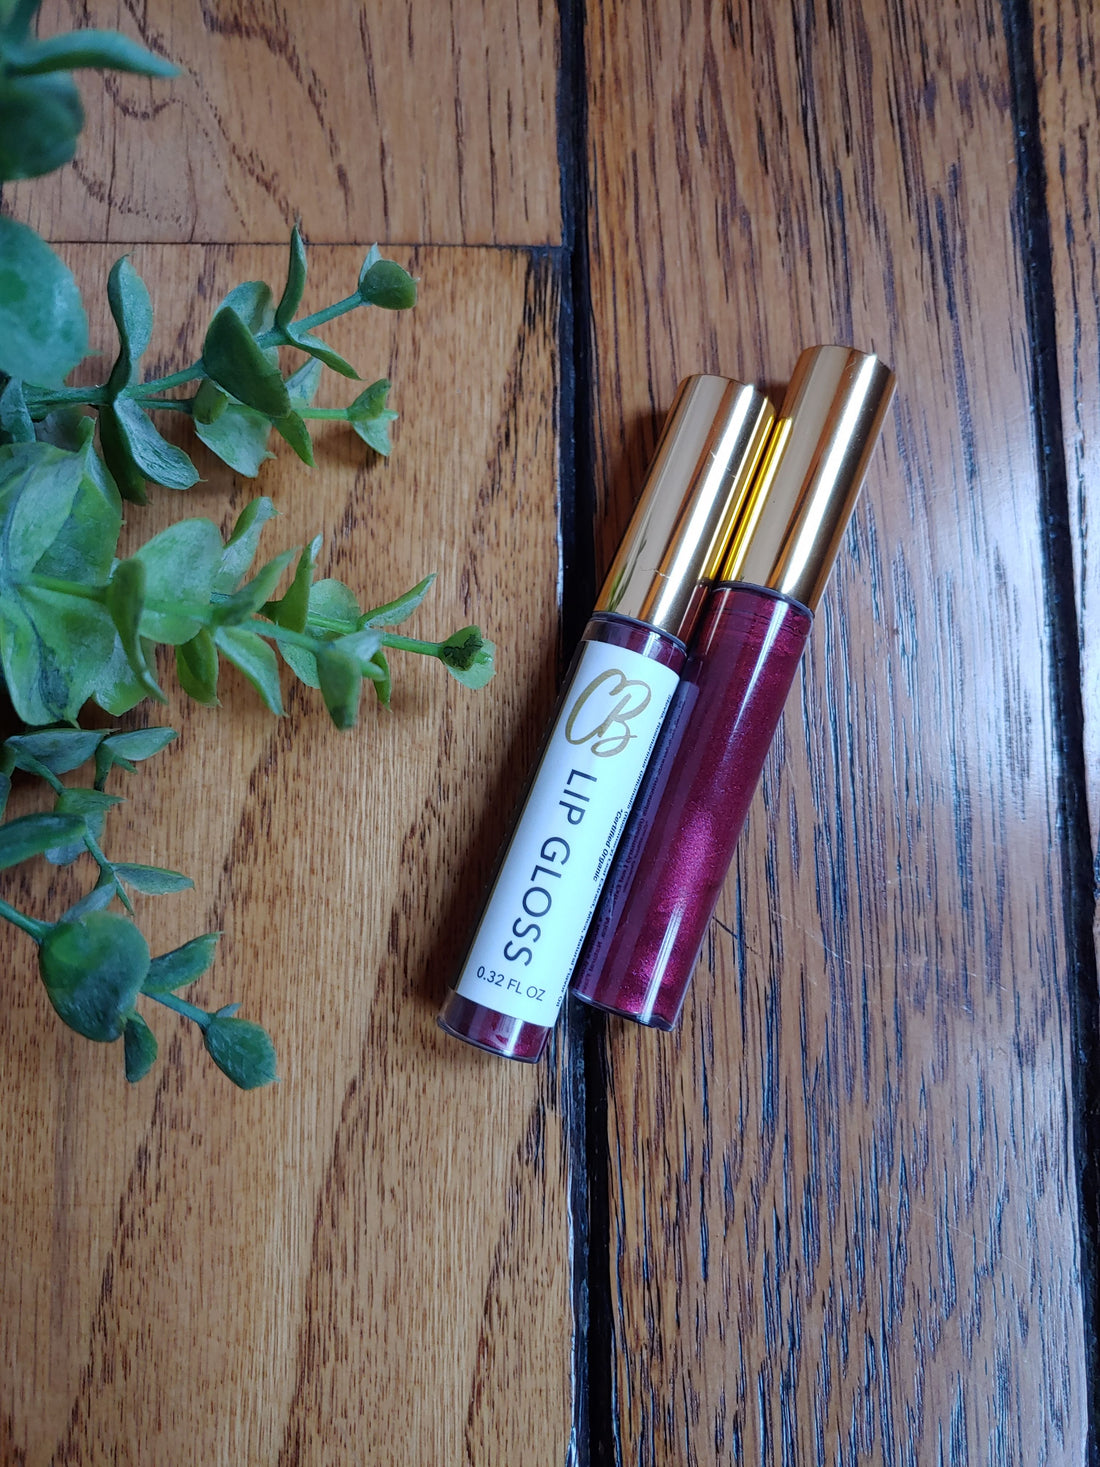 Ruby Perfect Pout Lip Gloss by Clean Beauty by joy. This creamy formula is long-lasting, moisturizing, and made with truly safe ingredients. The organic, vegan, gluten free ingredients are high-performing and are not sticky or tacky. Clean and safe makeup. 